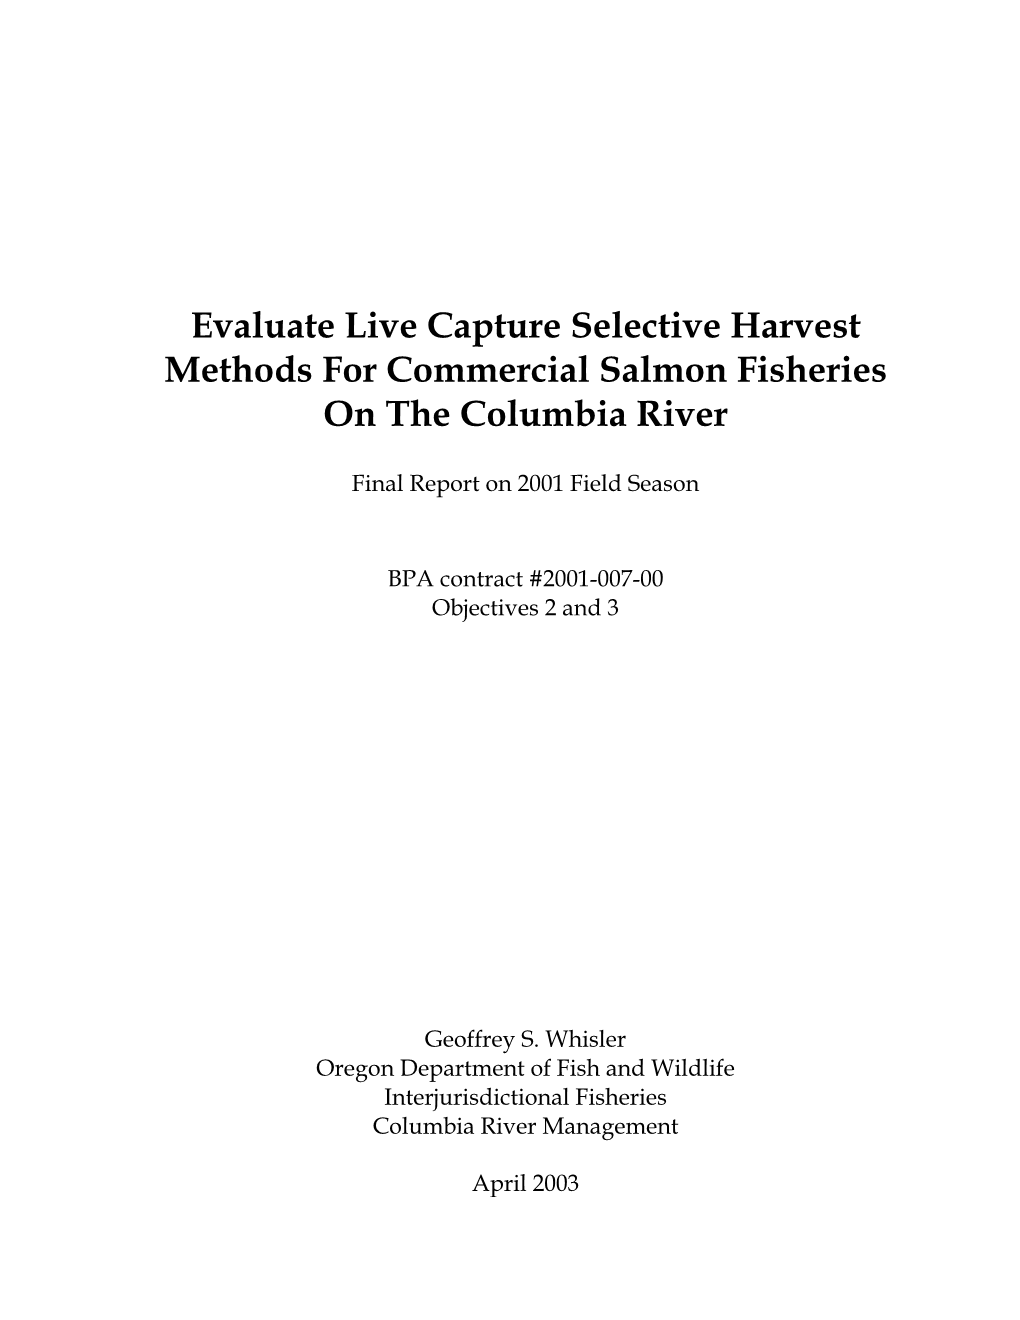 Evaluate Live Capture Selective Harvest Methods for Commercial Salmon Fisheries on the Columbia River